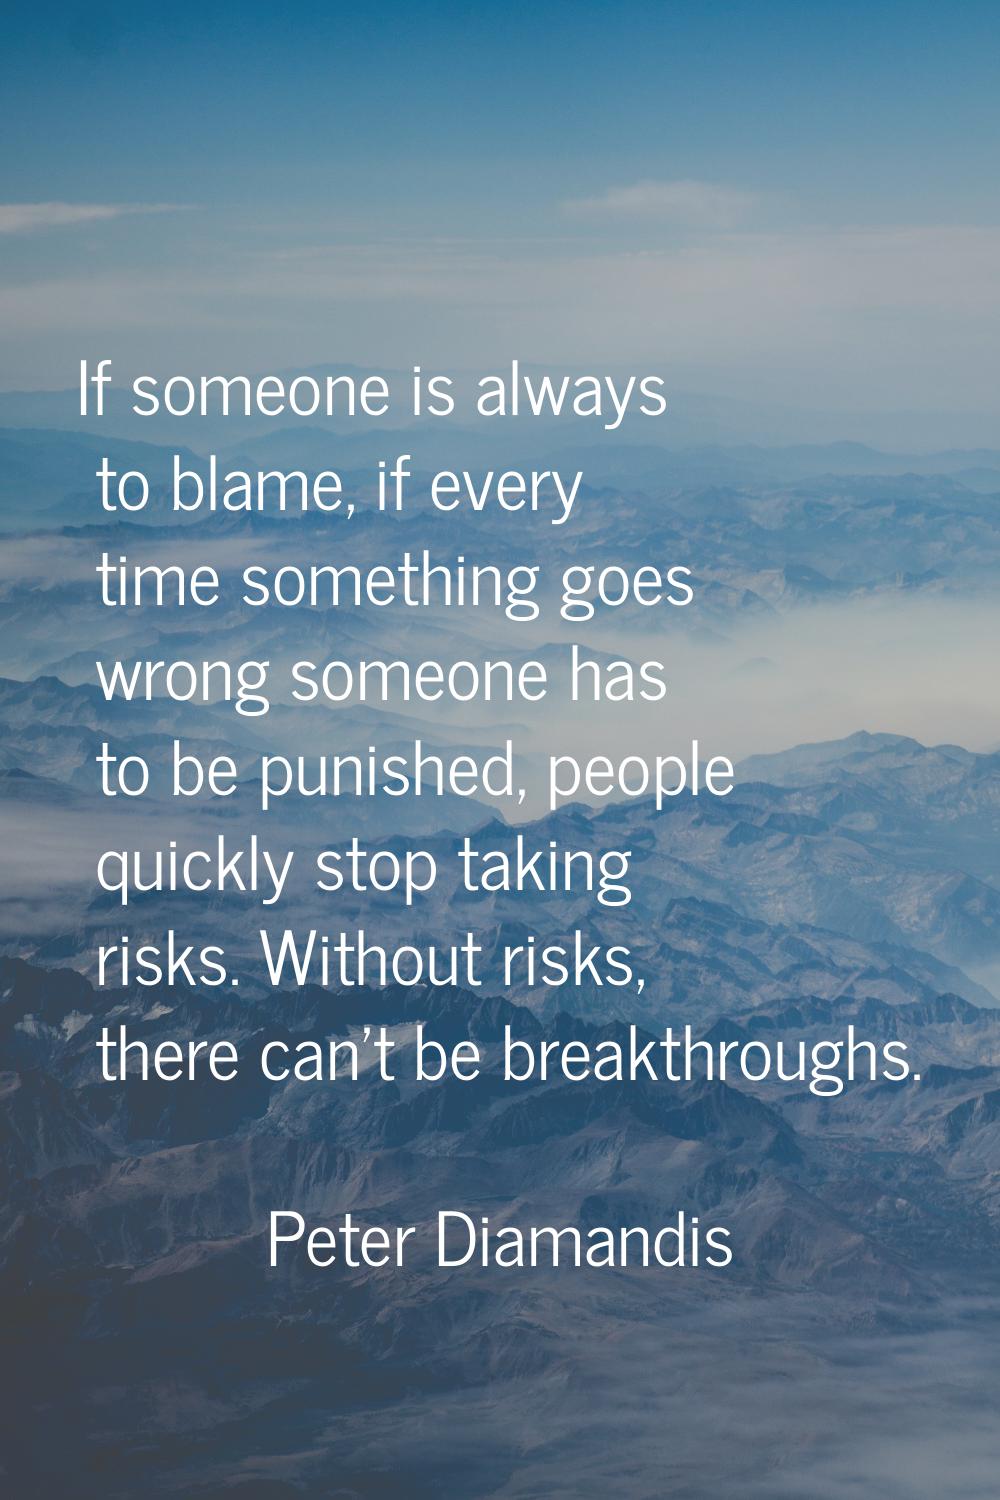 If someone is always to blame, if every time something goes wrong someone has to be punished, peopl